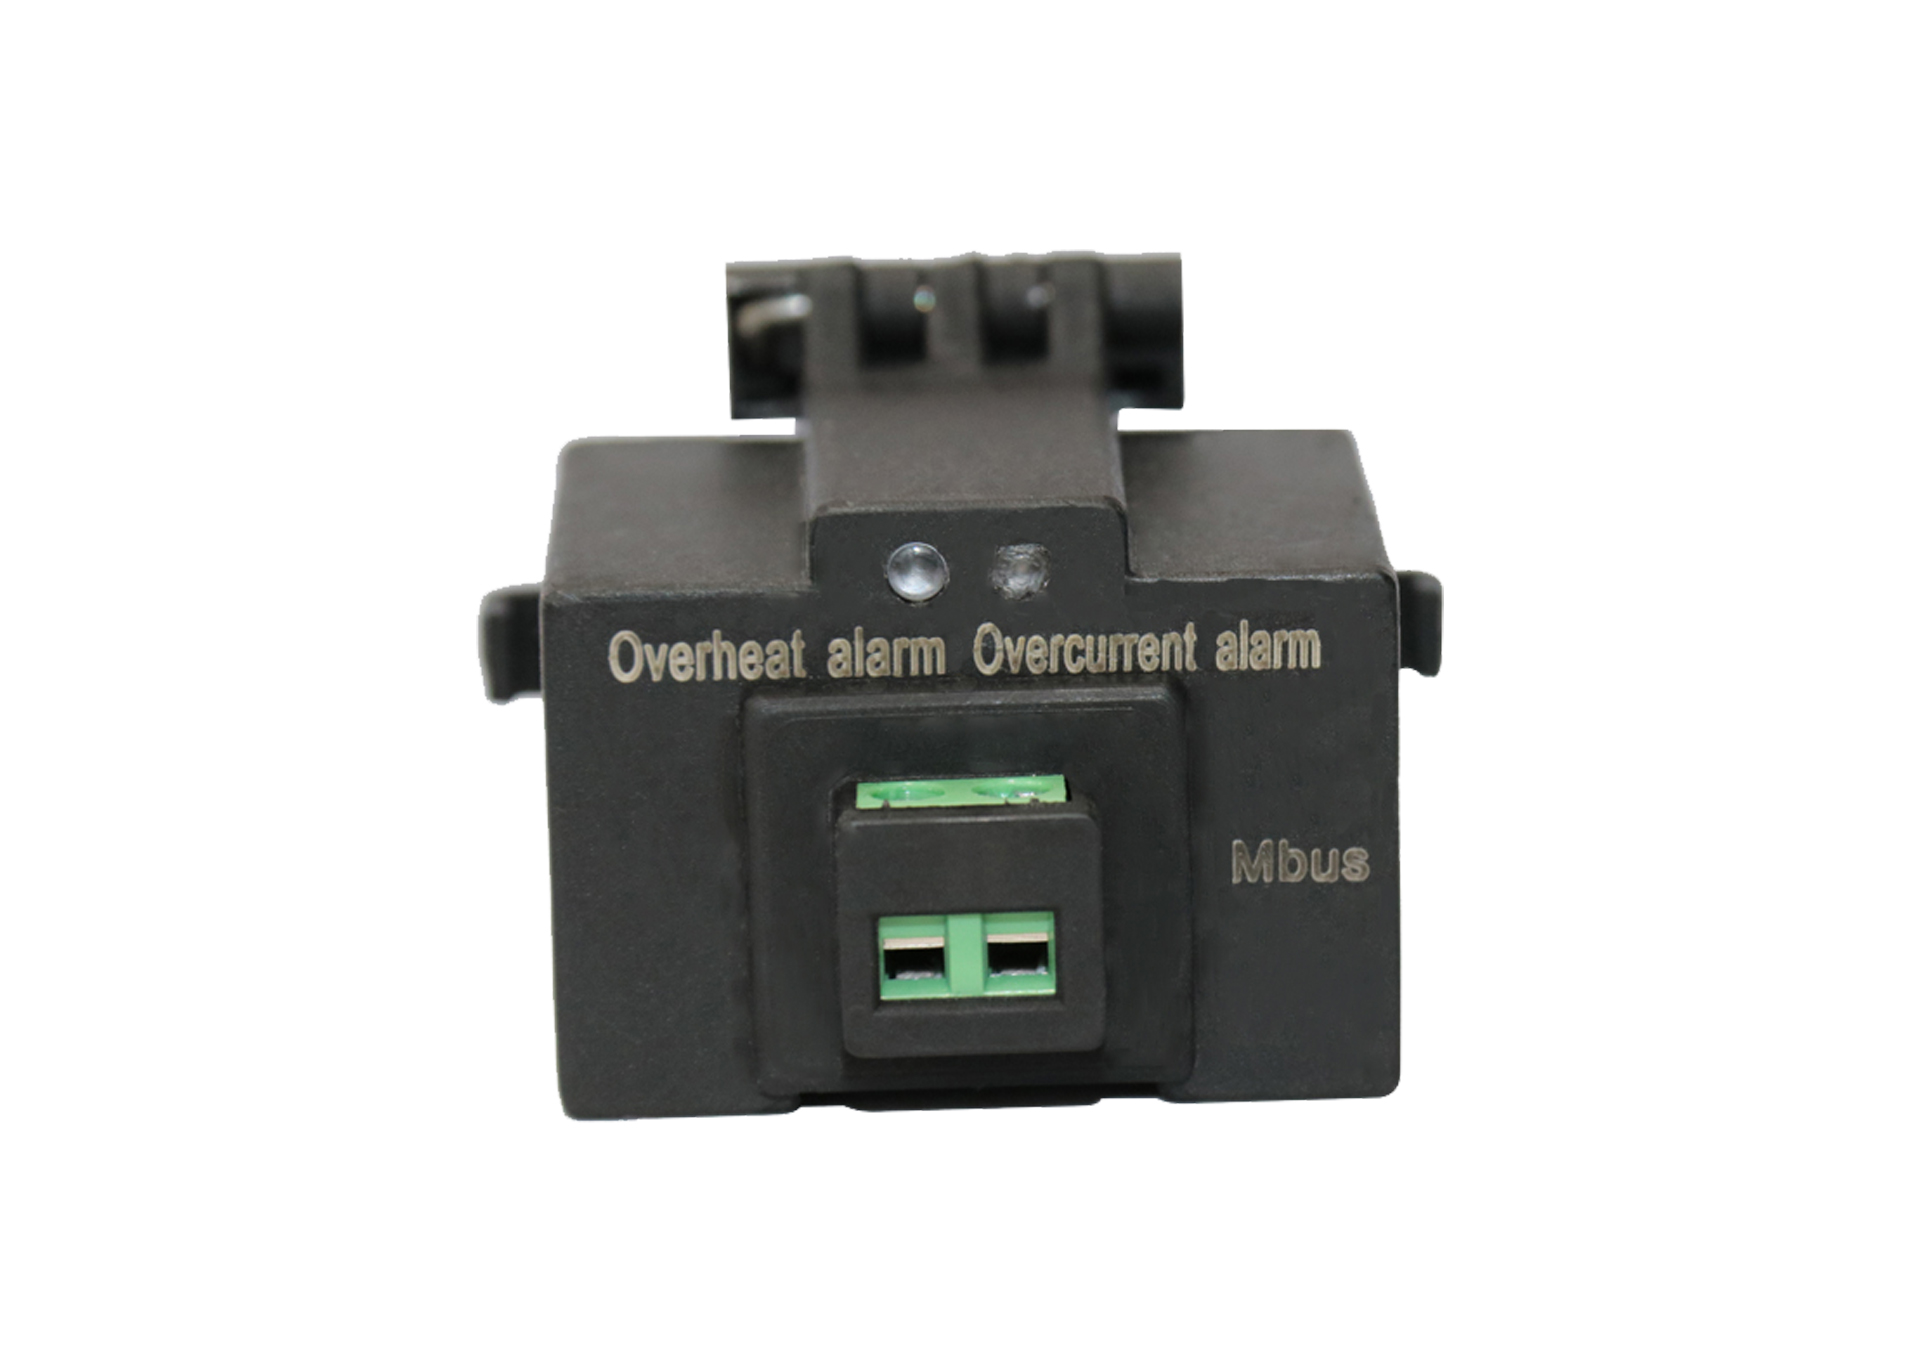 D129072 High Accuracy Over Current Alarm 100A Split Core CT EV AC Current Sensor with M-bus